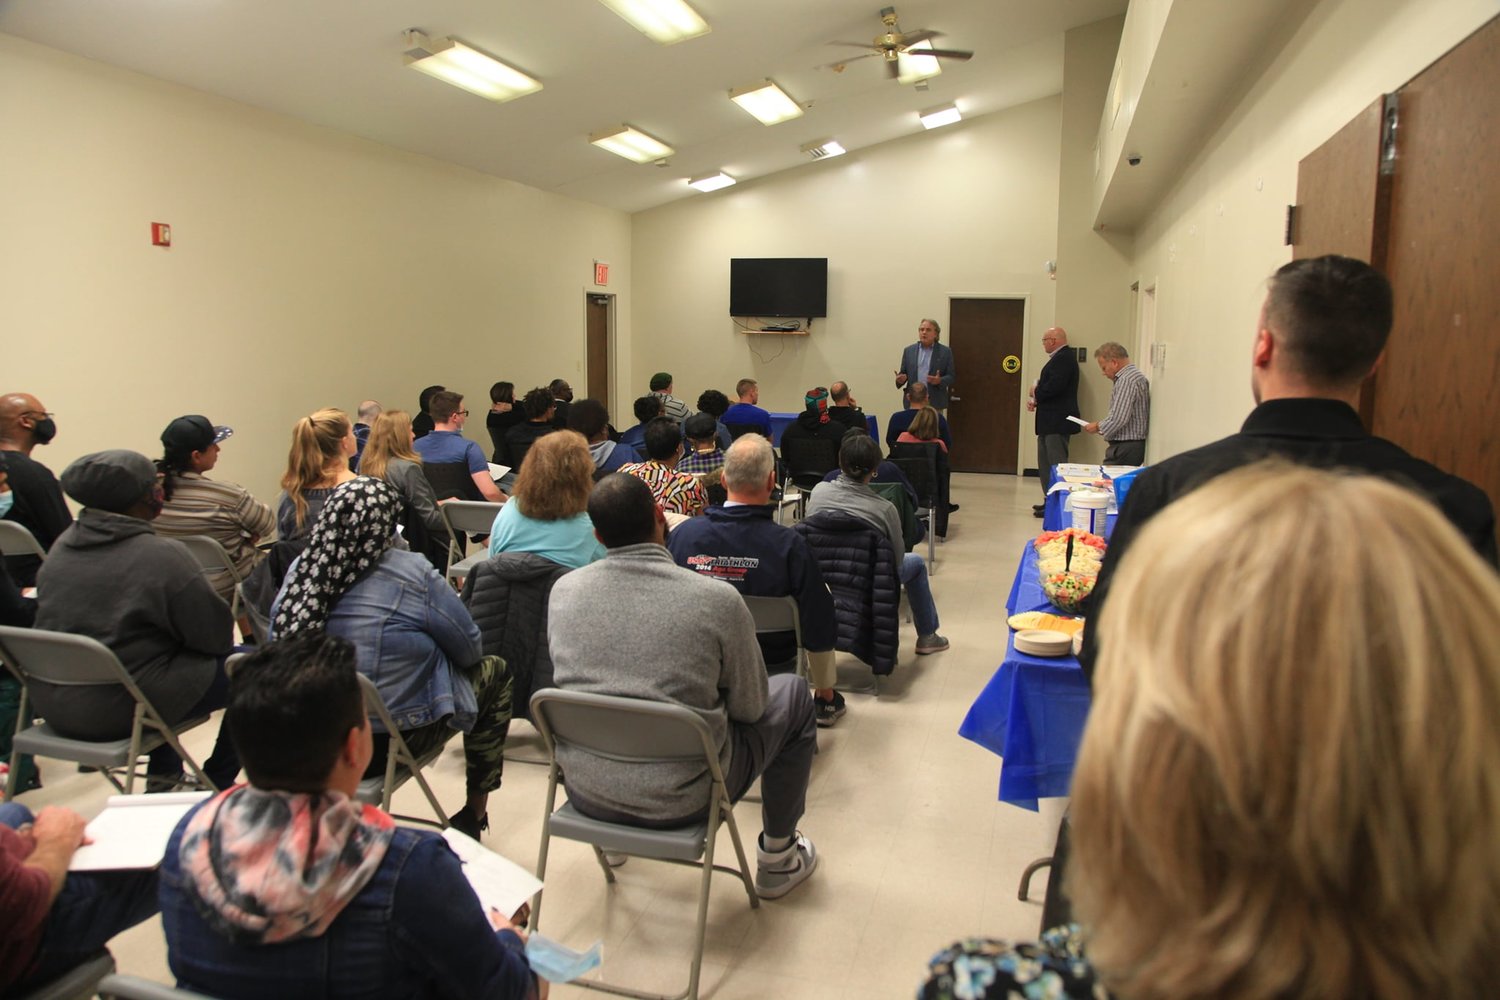 The Long Beach Police Department hosted their first presentation about preventing drug and alcohol abuse last Thursday in the Housing Authority community room.